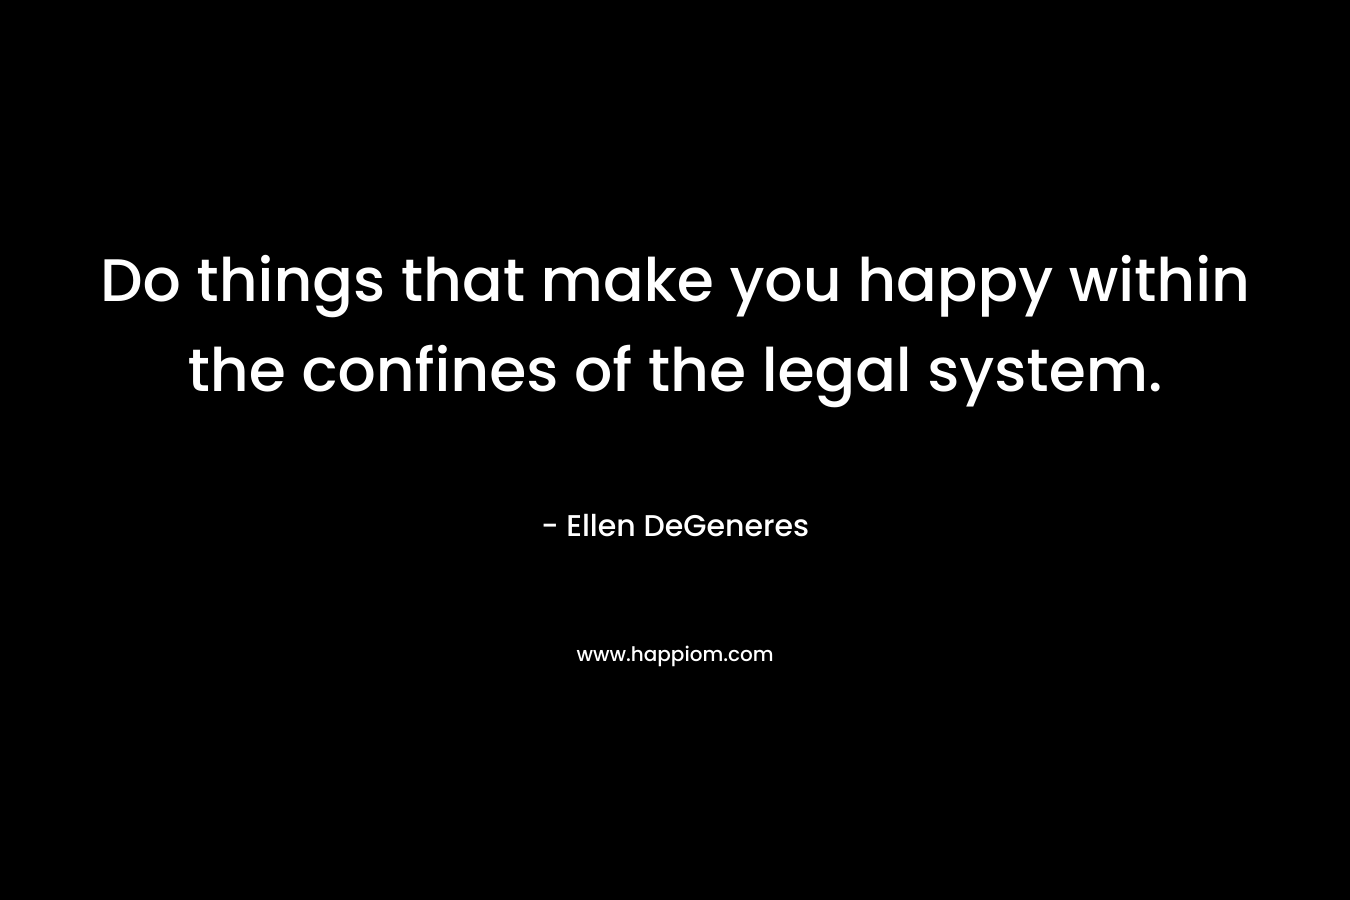 Do things that make you happy within the confines of the legal system. – Ellen DeGeneres